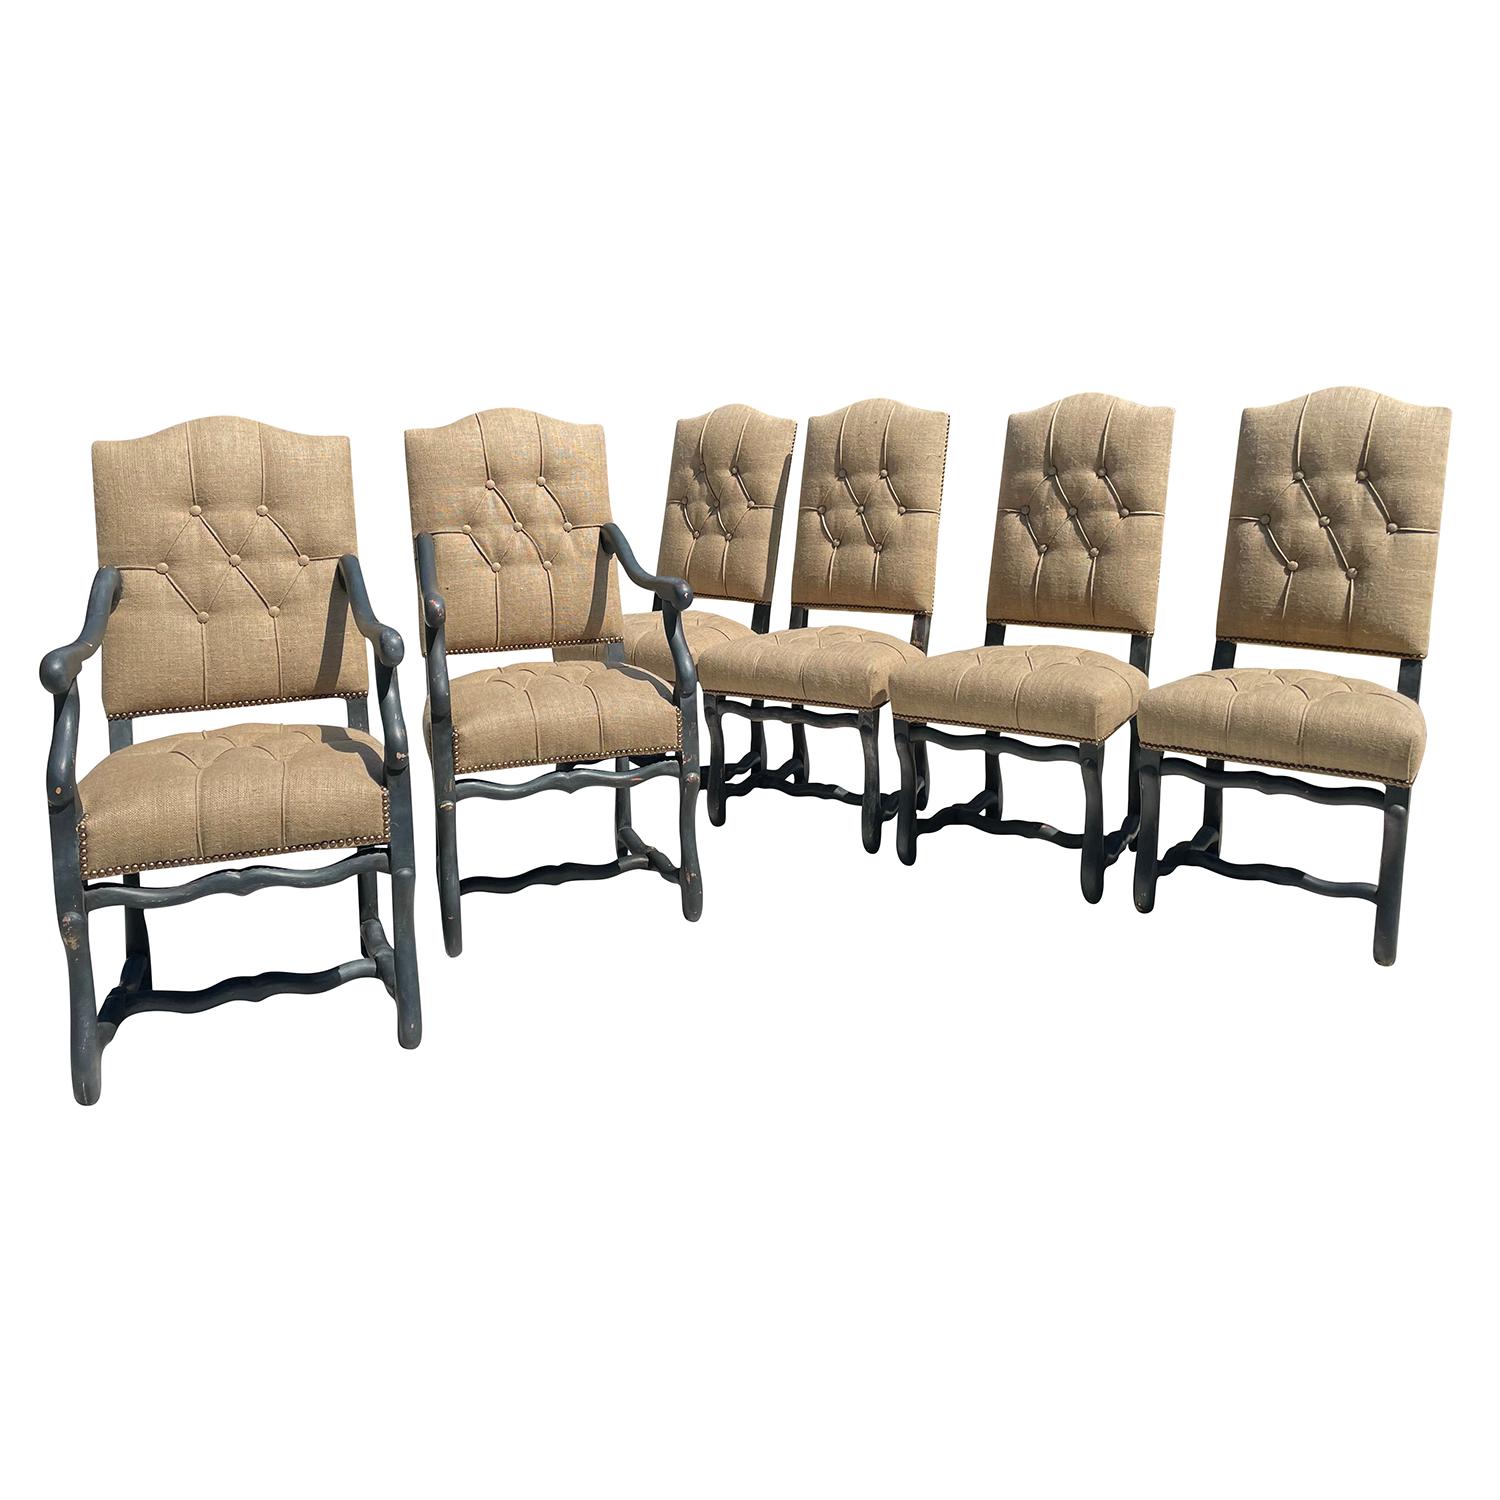 A black, antique French set of six os du mouton (sheep bone) dining room chairs, composed with two armchairs and four side chairs made of hand crafted painted Beechwood, in good condition. The Parisian corner chairs have a slightly curved tall